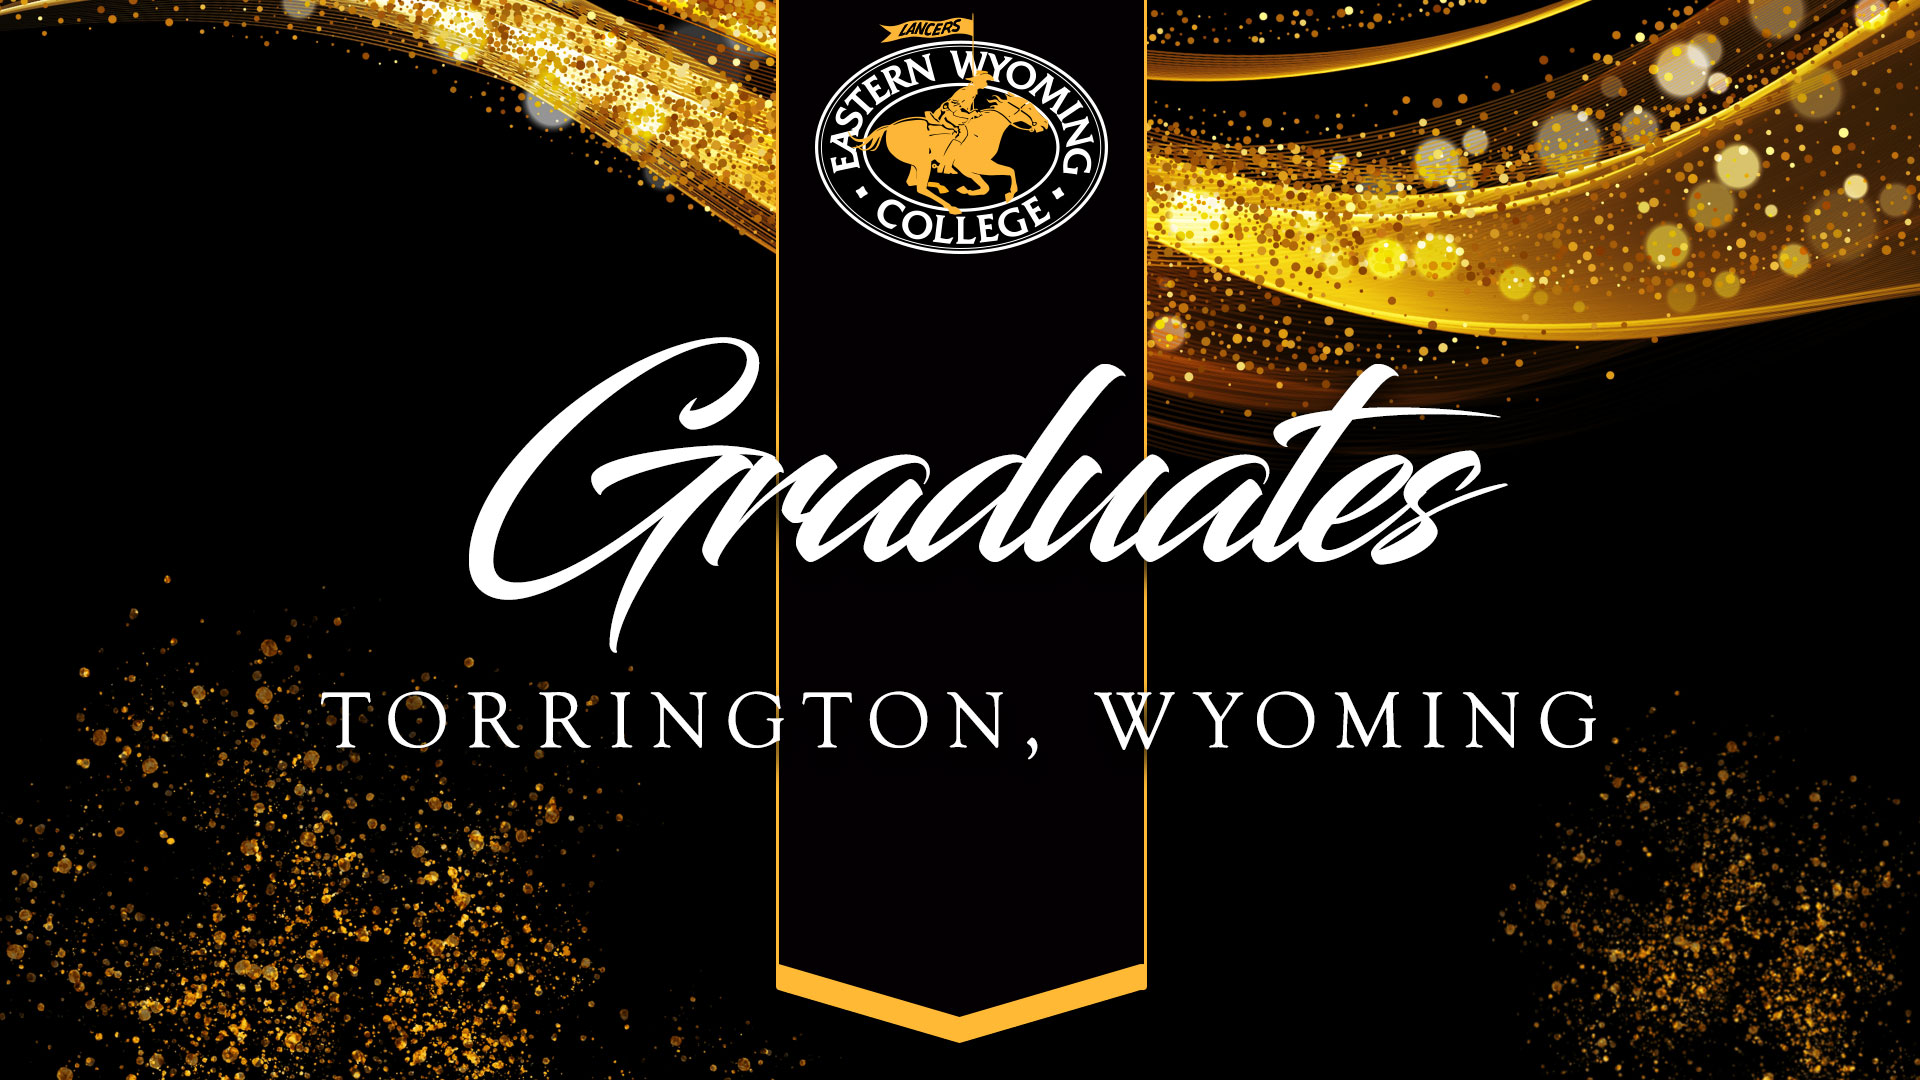 Eastern Wyoming College held the 74th annual commencement for candidates on May 12, 2023 in the Fine Arts Auditorium. There were 171 graduates. The graduates from the Fall 2022, Spring 2023 and Summer 2023 semesters are as follows